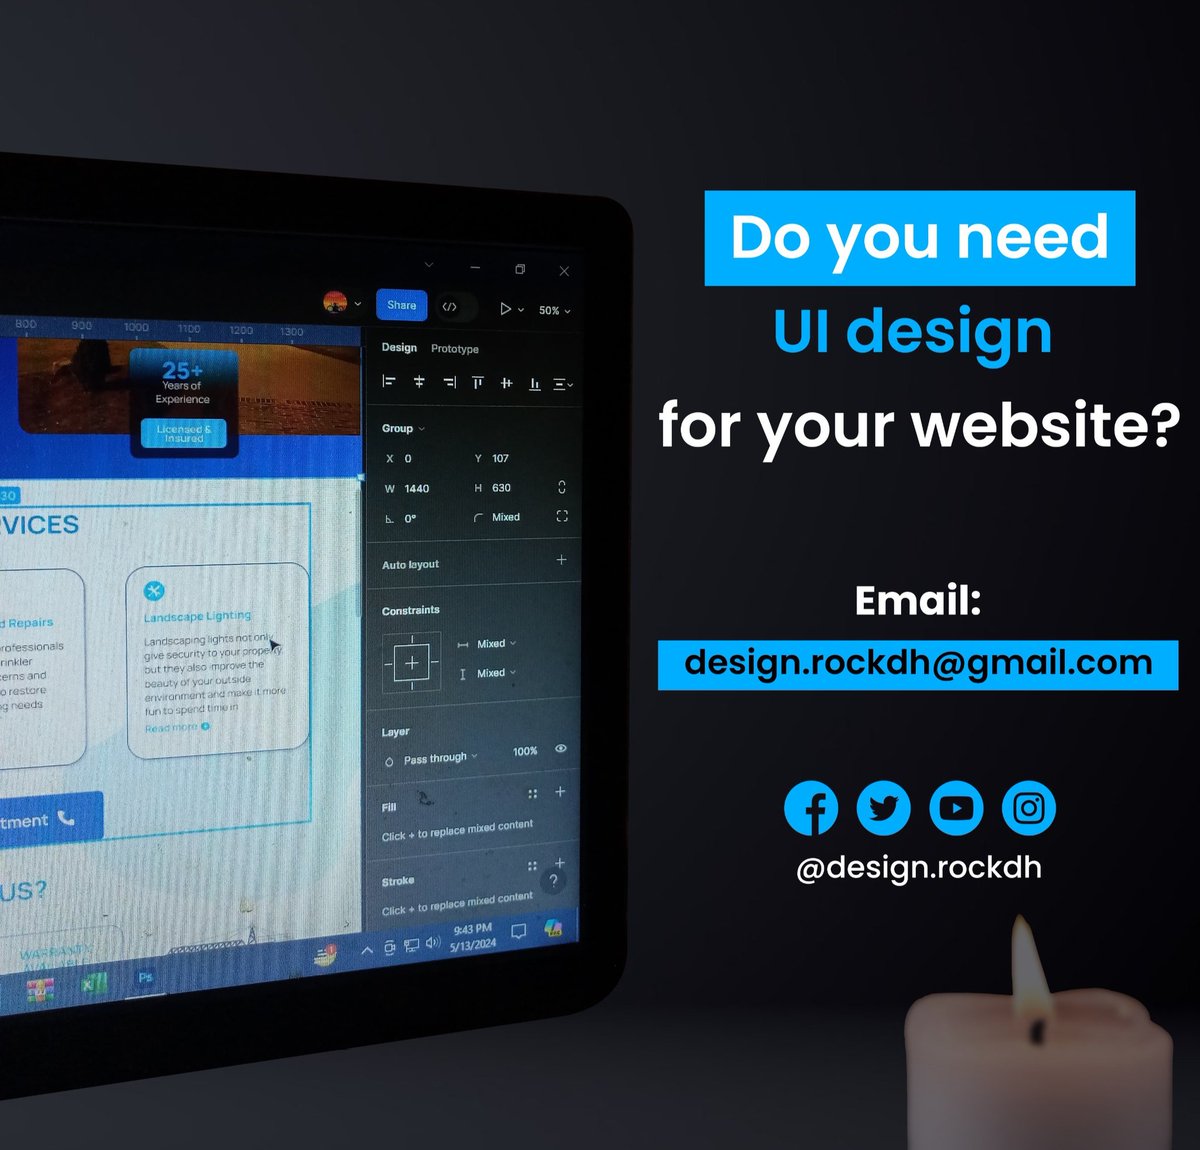 Do you need UI design for your website ?
Email: design.rockdh@gmail.com

#design #ui #ux #uidesign #websitedesign #uiuxdesign #webdesign #designrockdh